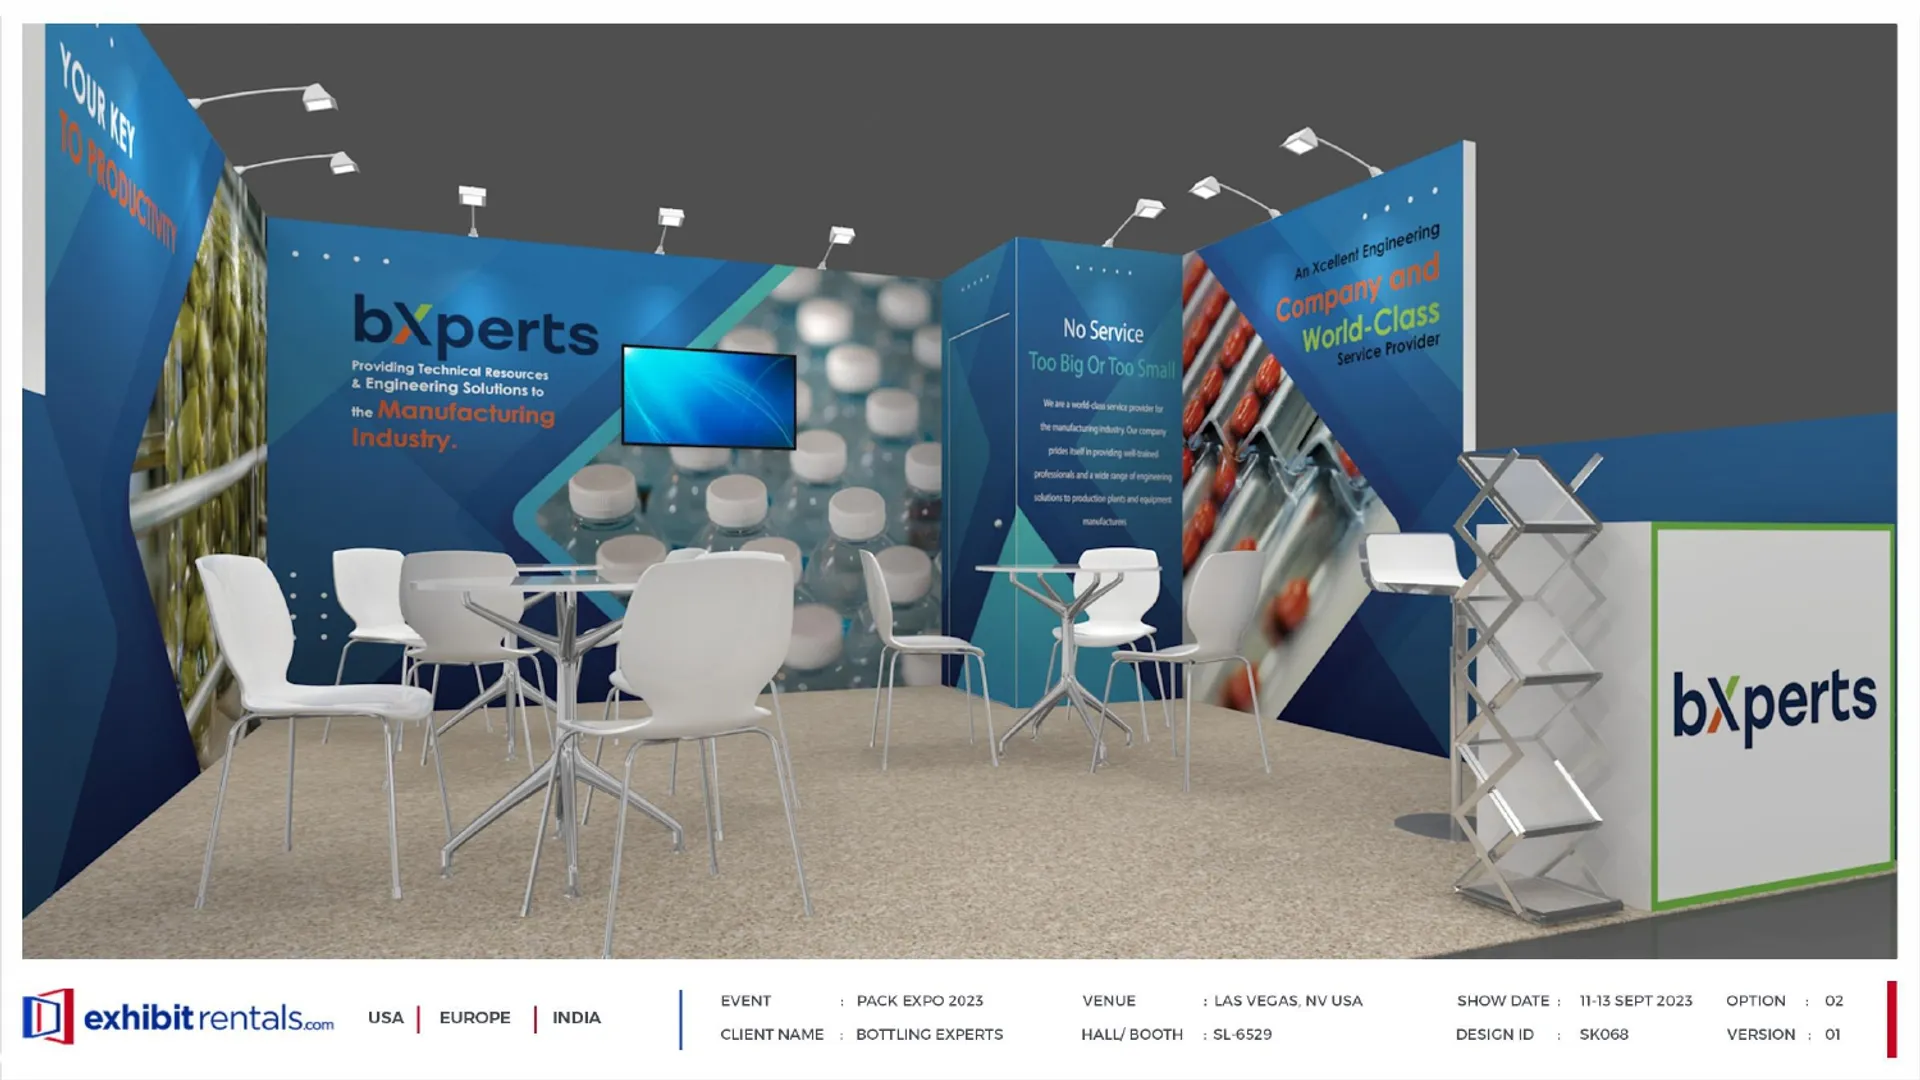 booth-design-projects/Exhibit-Rentals/2024-04-18-15x15-INLINE-Project-92/2.1 - Bottling Experts - ER Design Presentation.pptx-13_page-0001-woipwq.jpg